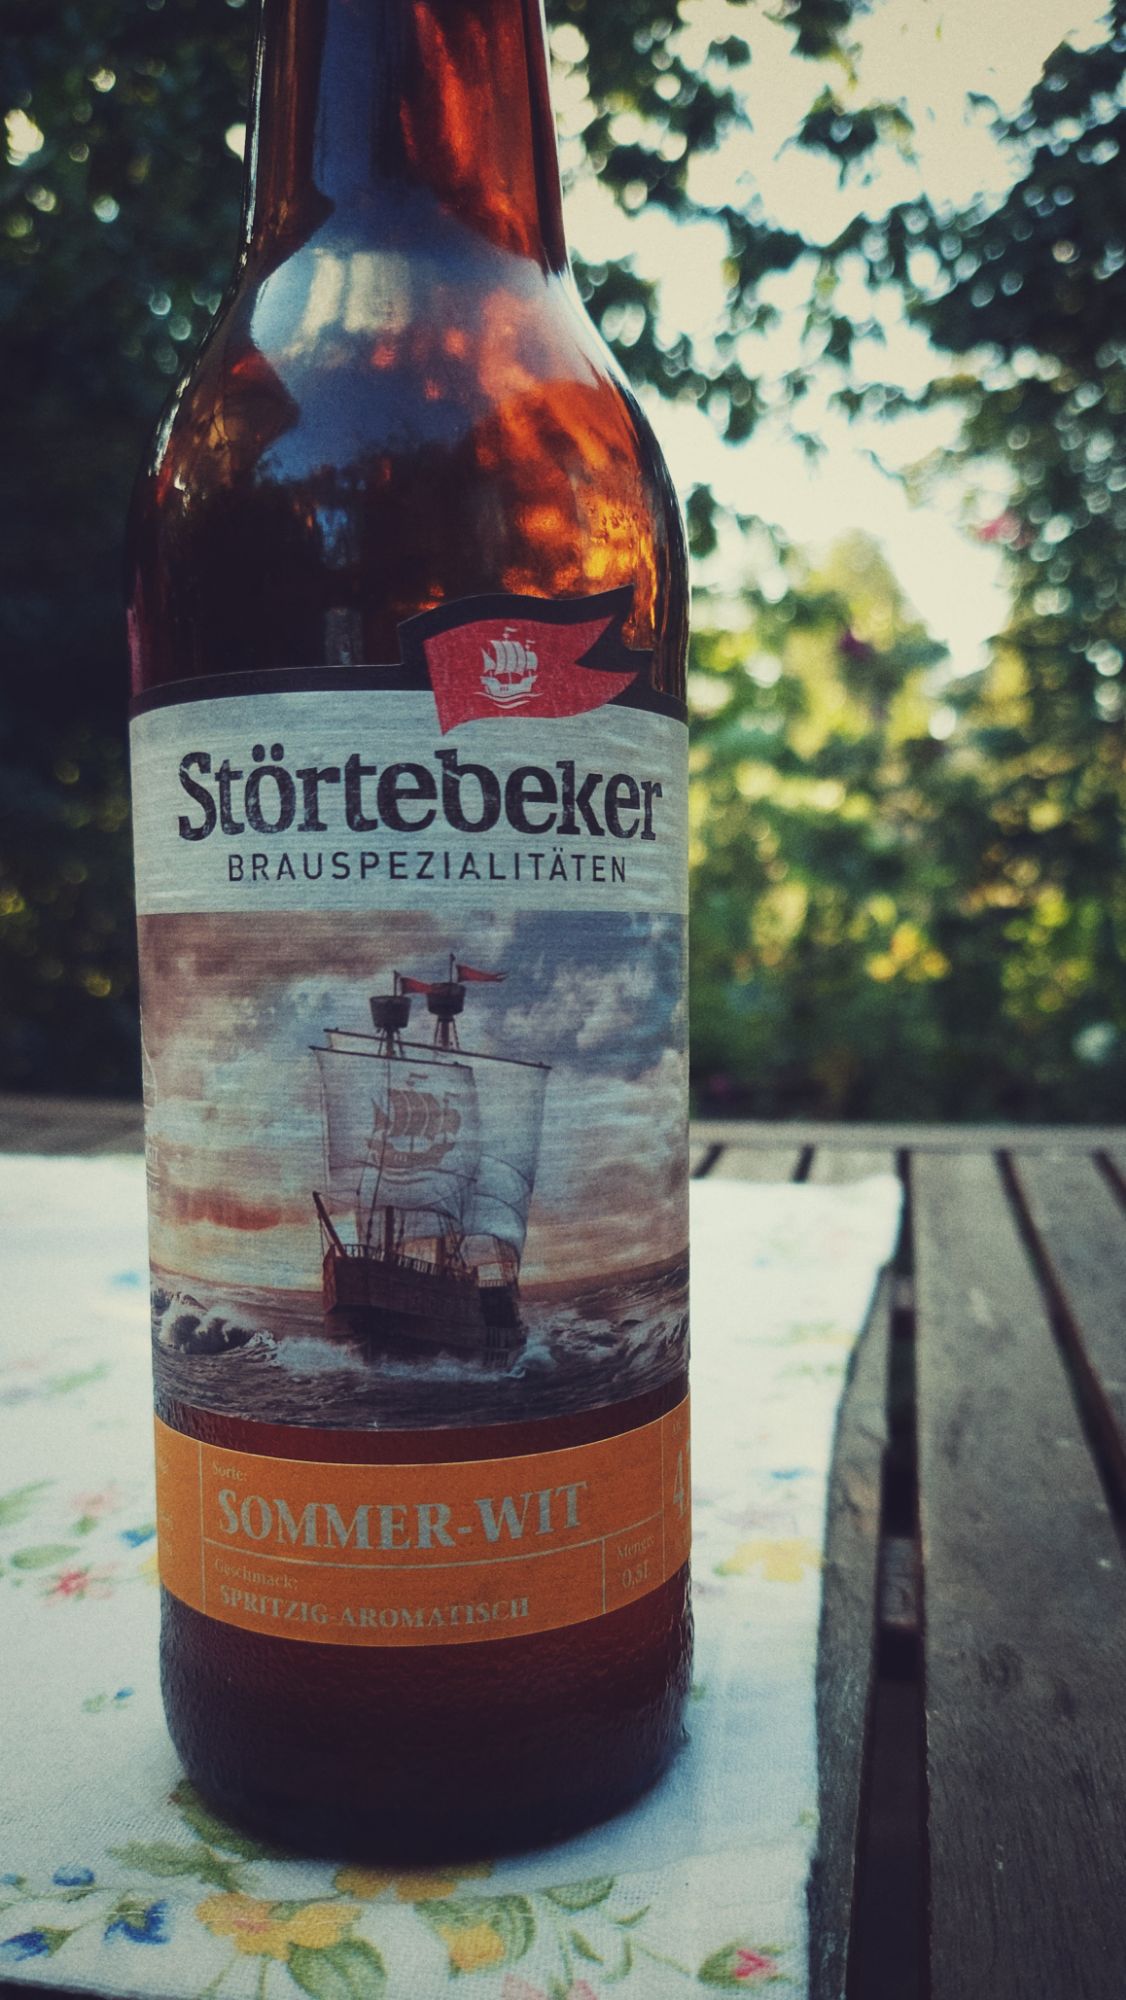 A bottle of Störtebeker Sommer Wit on a garden table. The tablecloth is white and features small flowers.